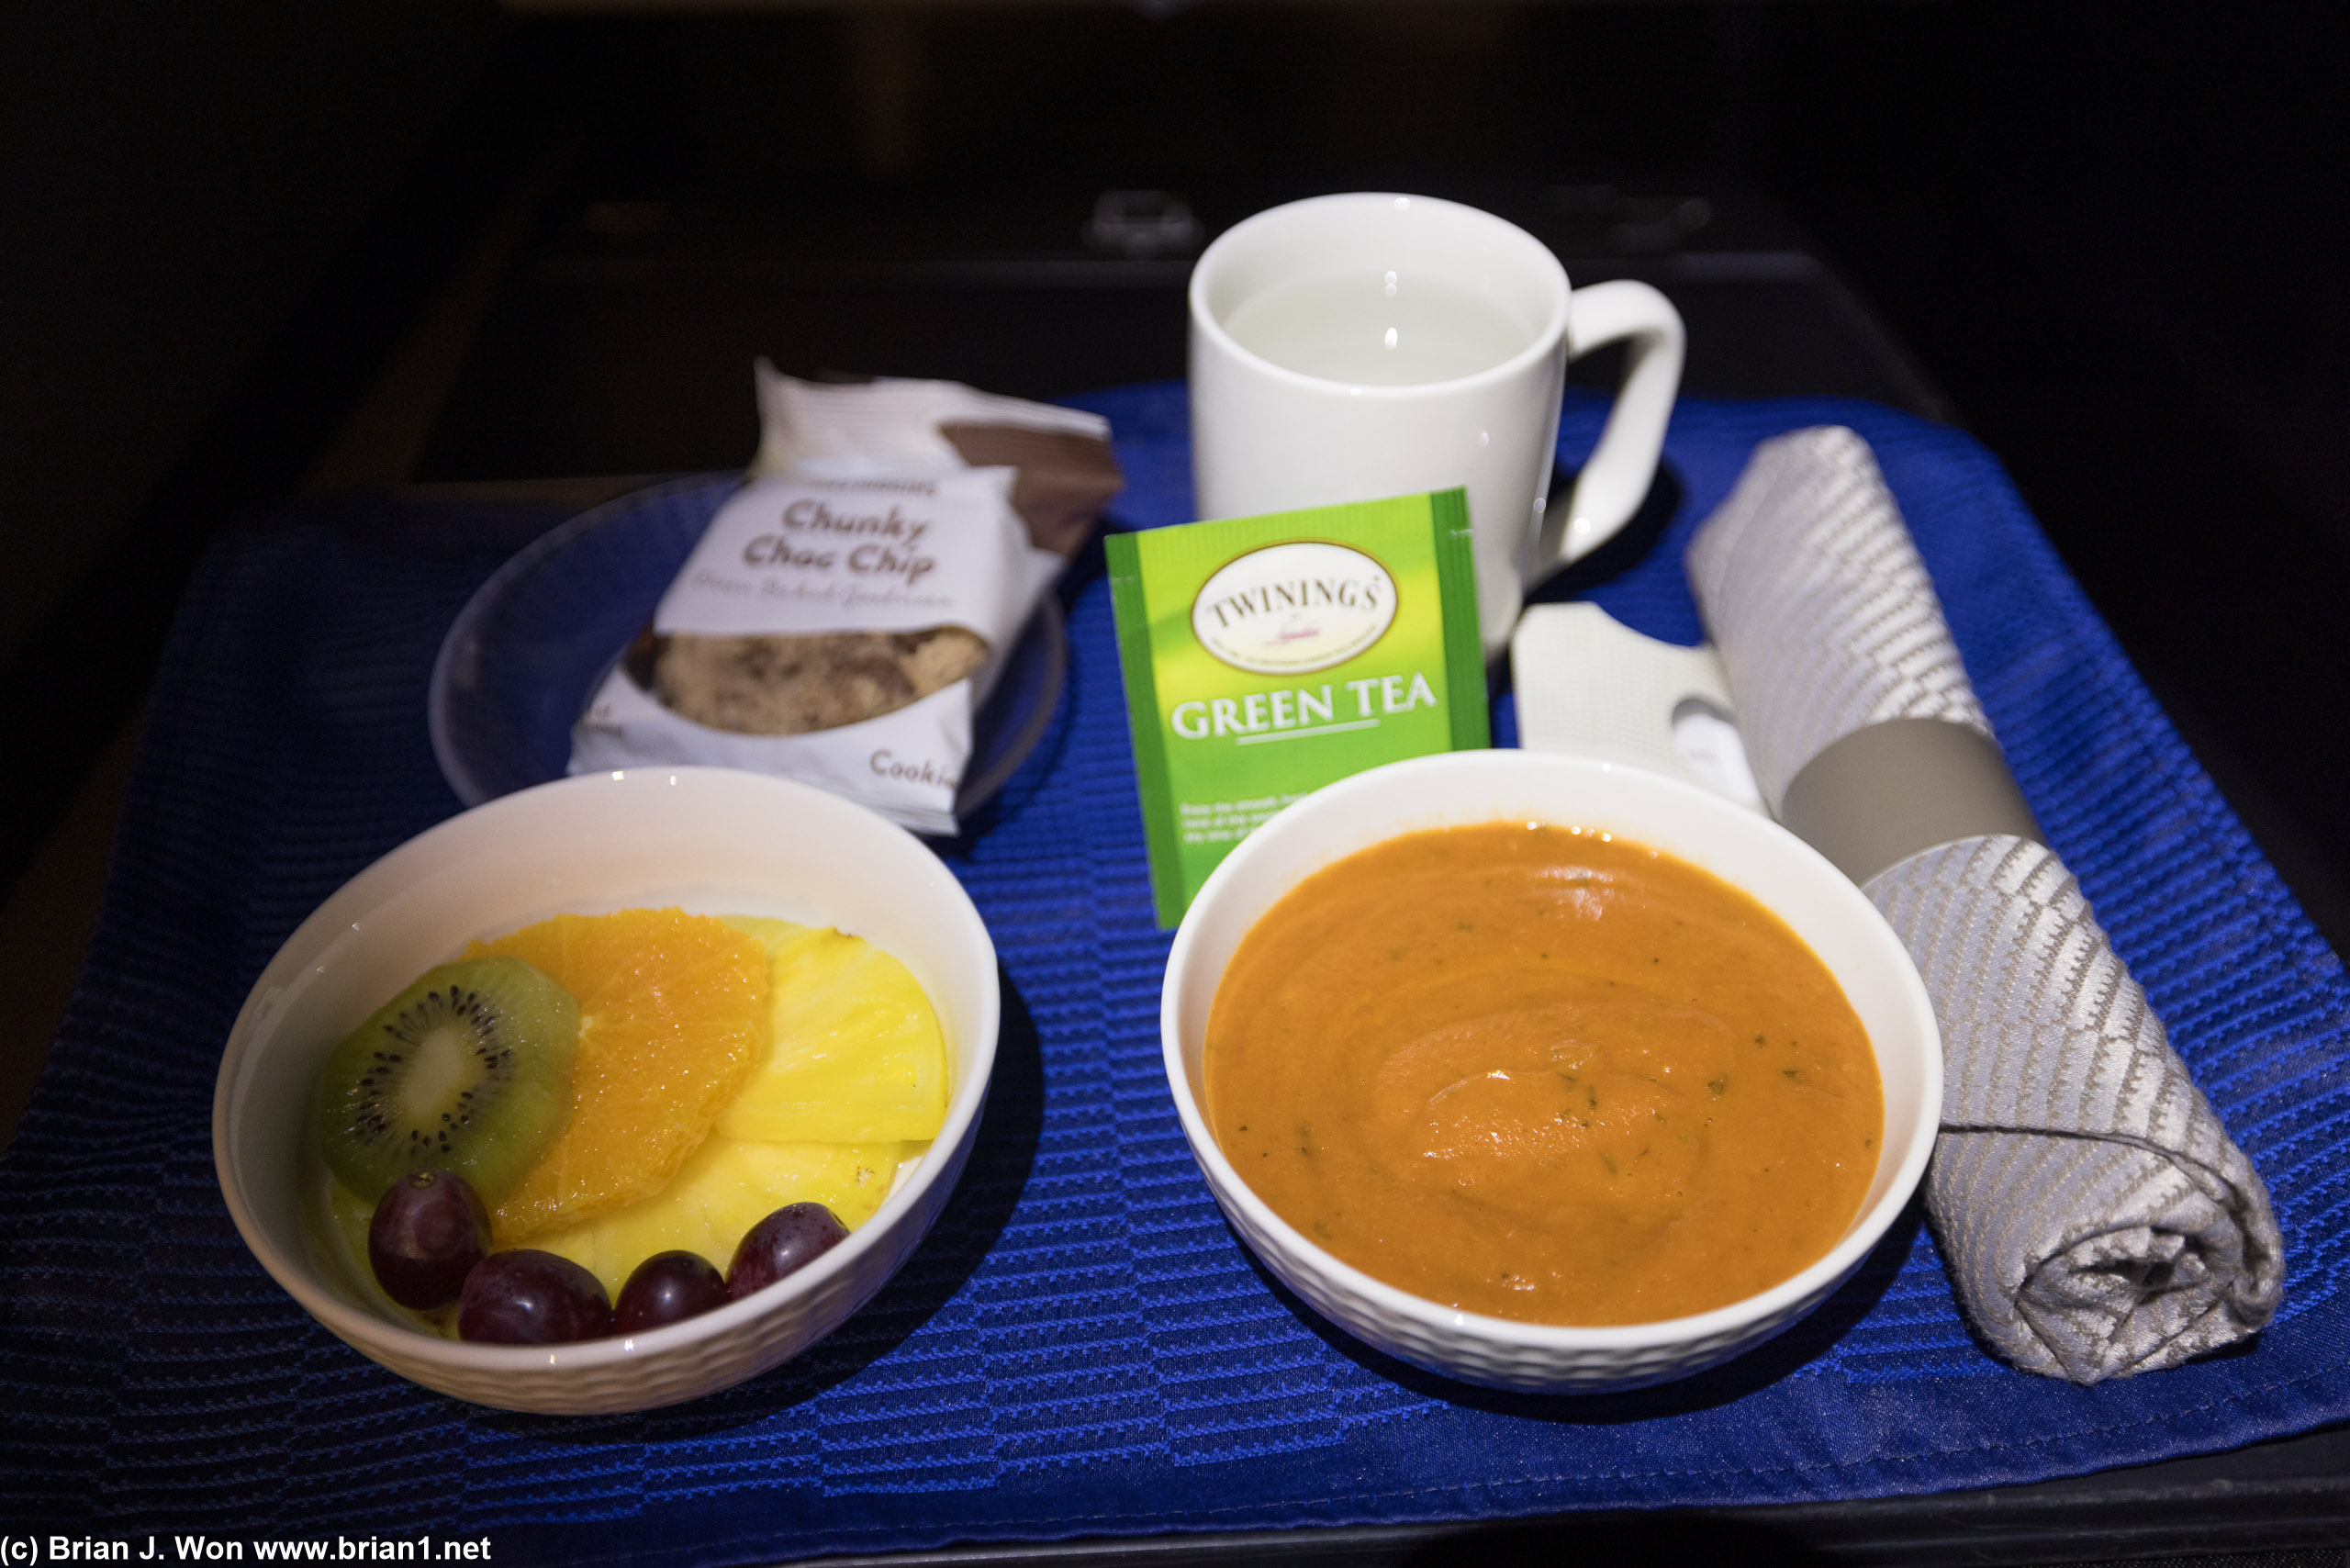 Mid-flight tomato basil soup was gross. Or maybe I just don't like tomato basil soup.